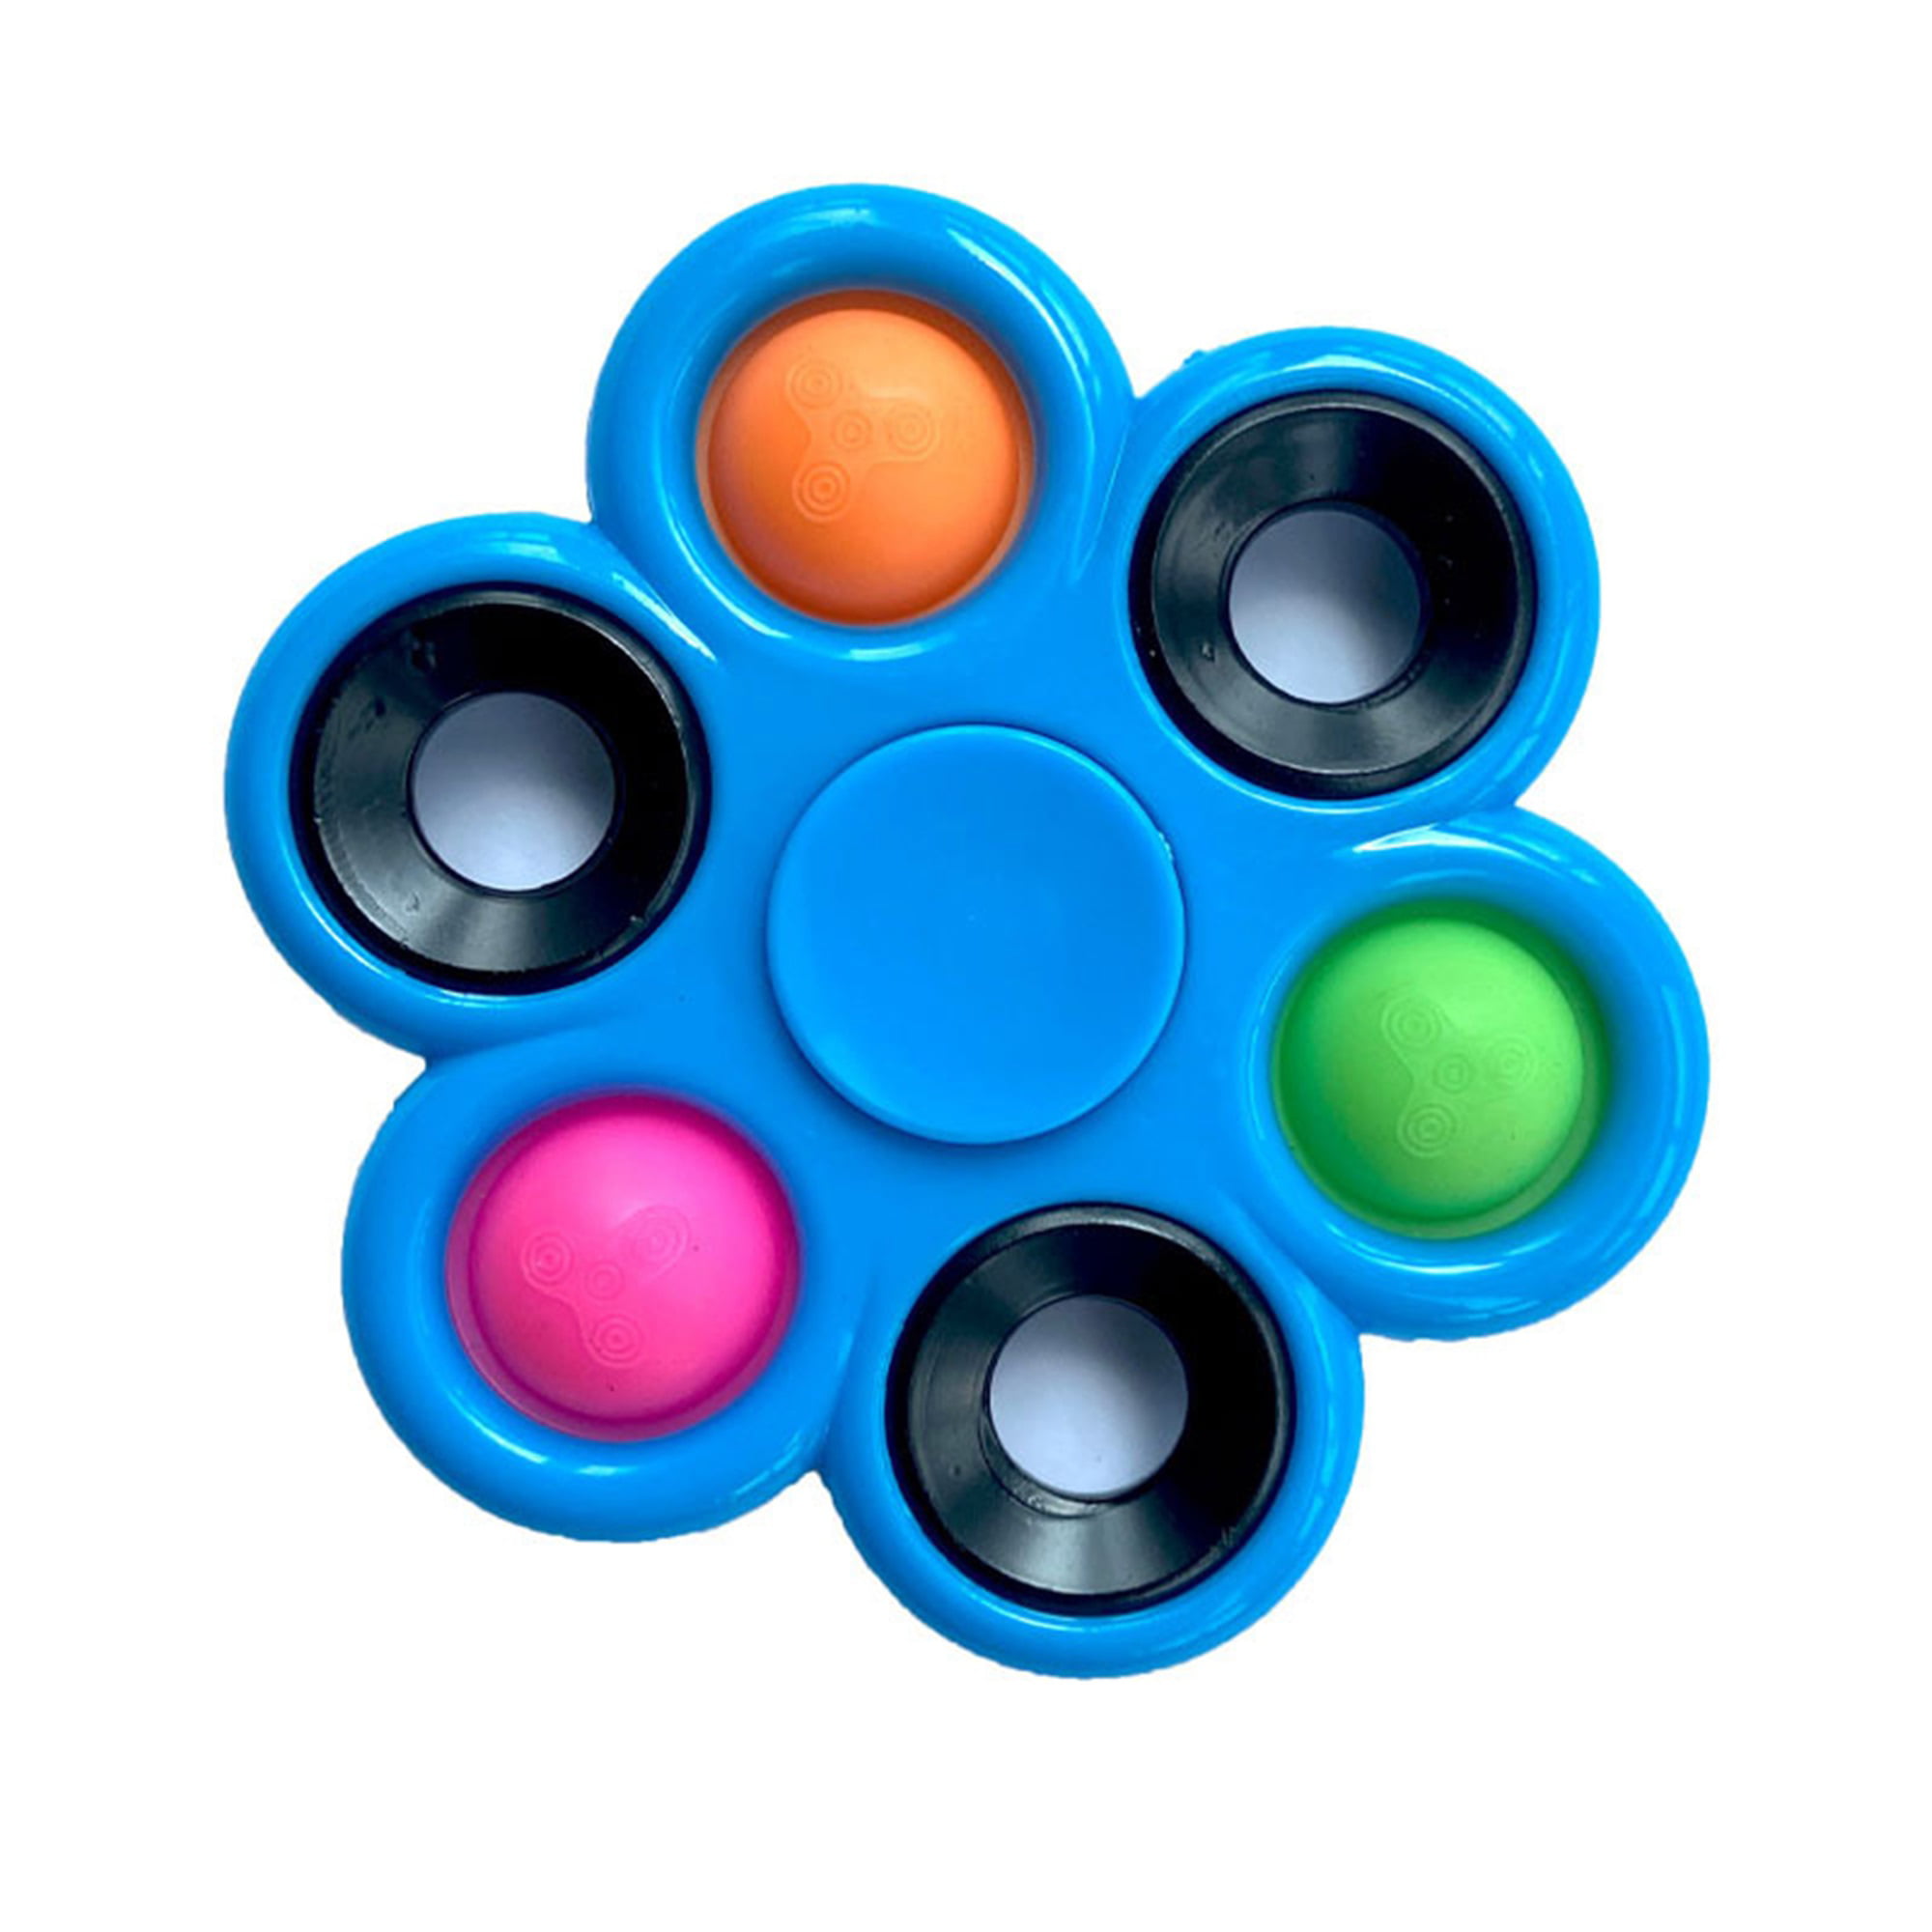 20 Multi Color Main Spinner Fidget Crazy Spinner Stress Relief Toy 20 pcs 